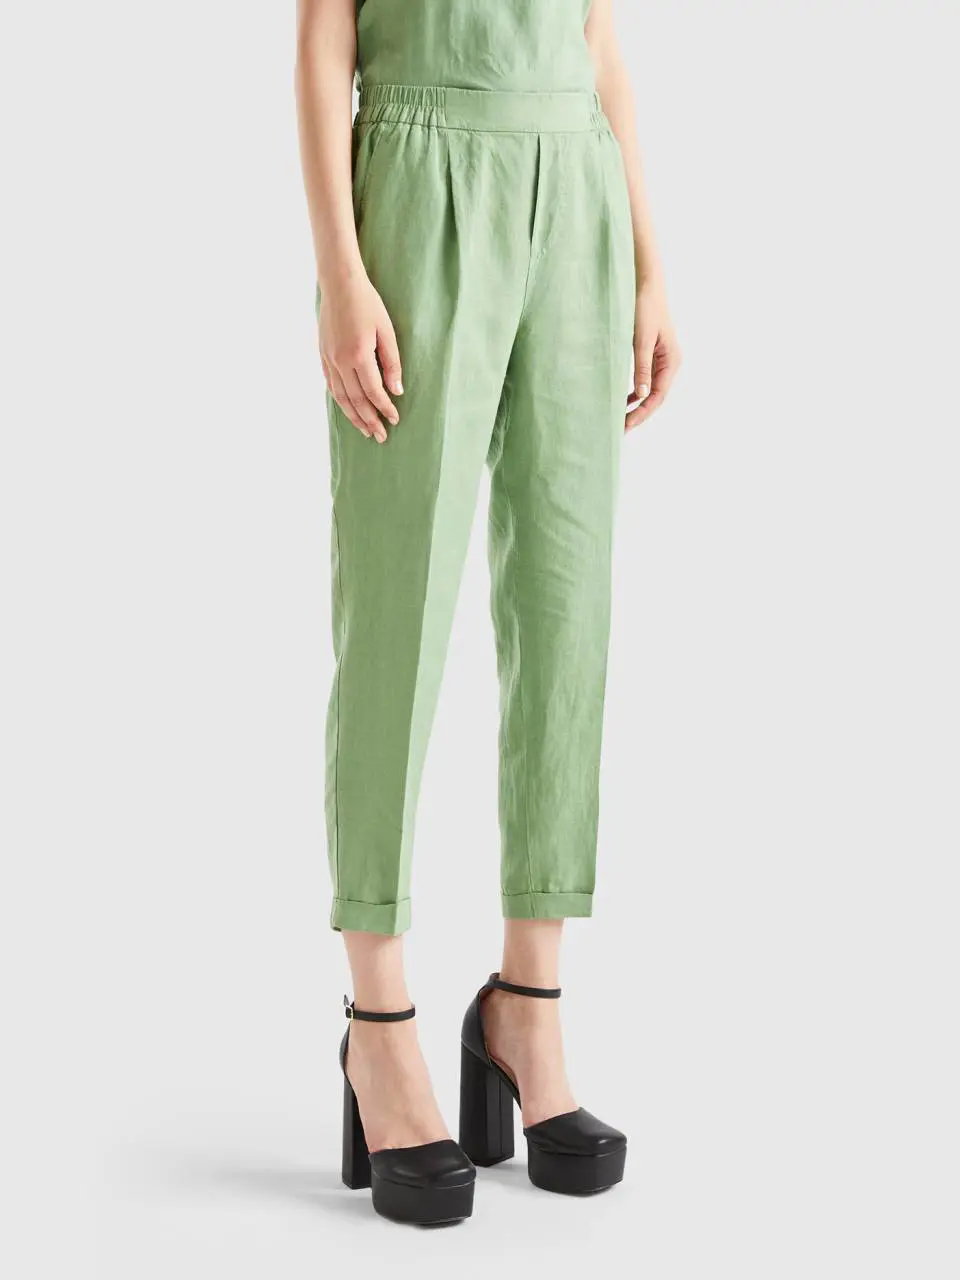 Benetton cropped trousers in 100% linen. 1